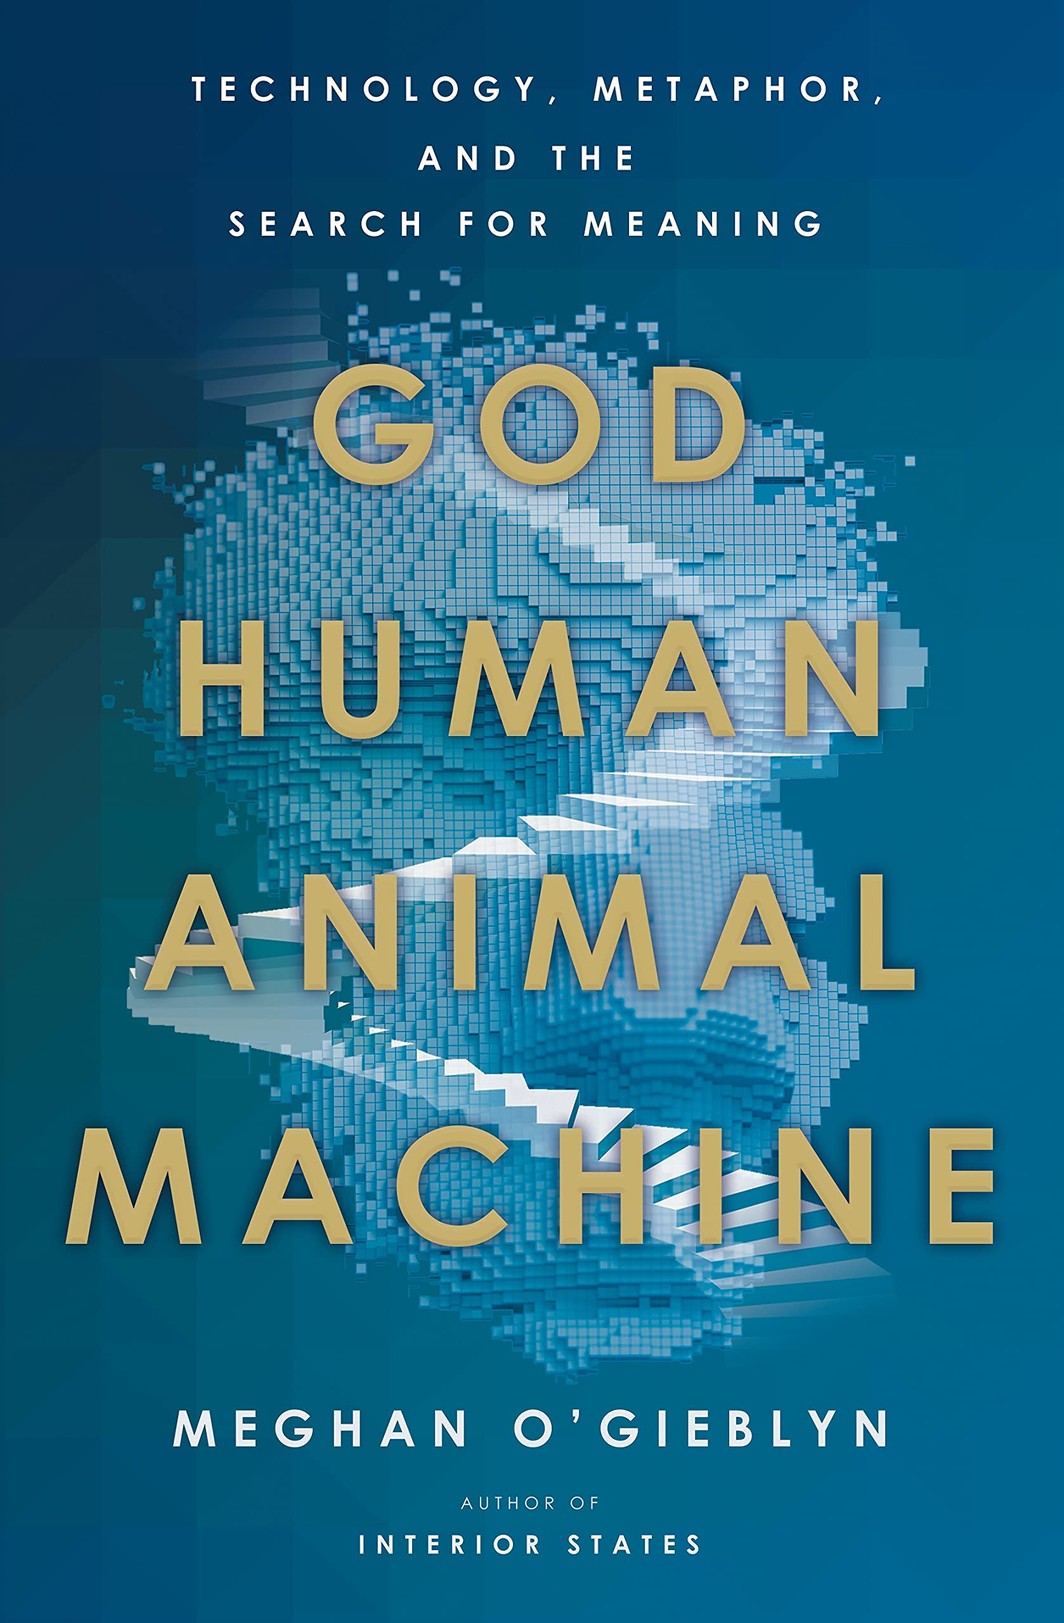 The cover of God, Human, Animal, Machine: Technology, Metaphor, and the Search for Meaning